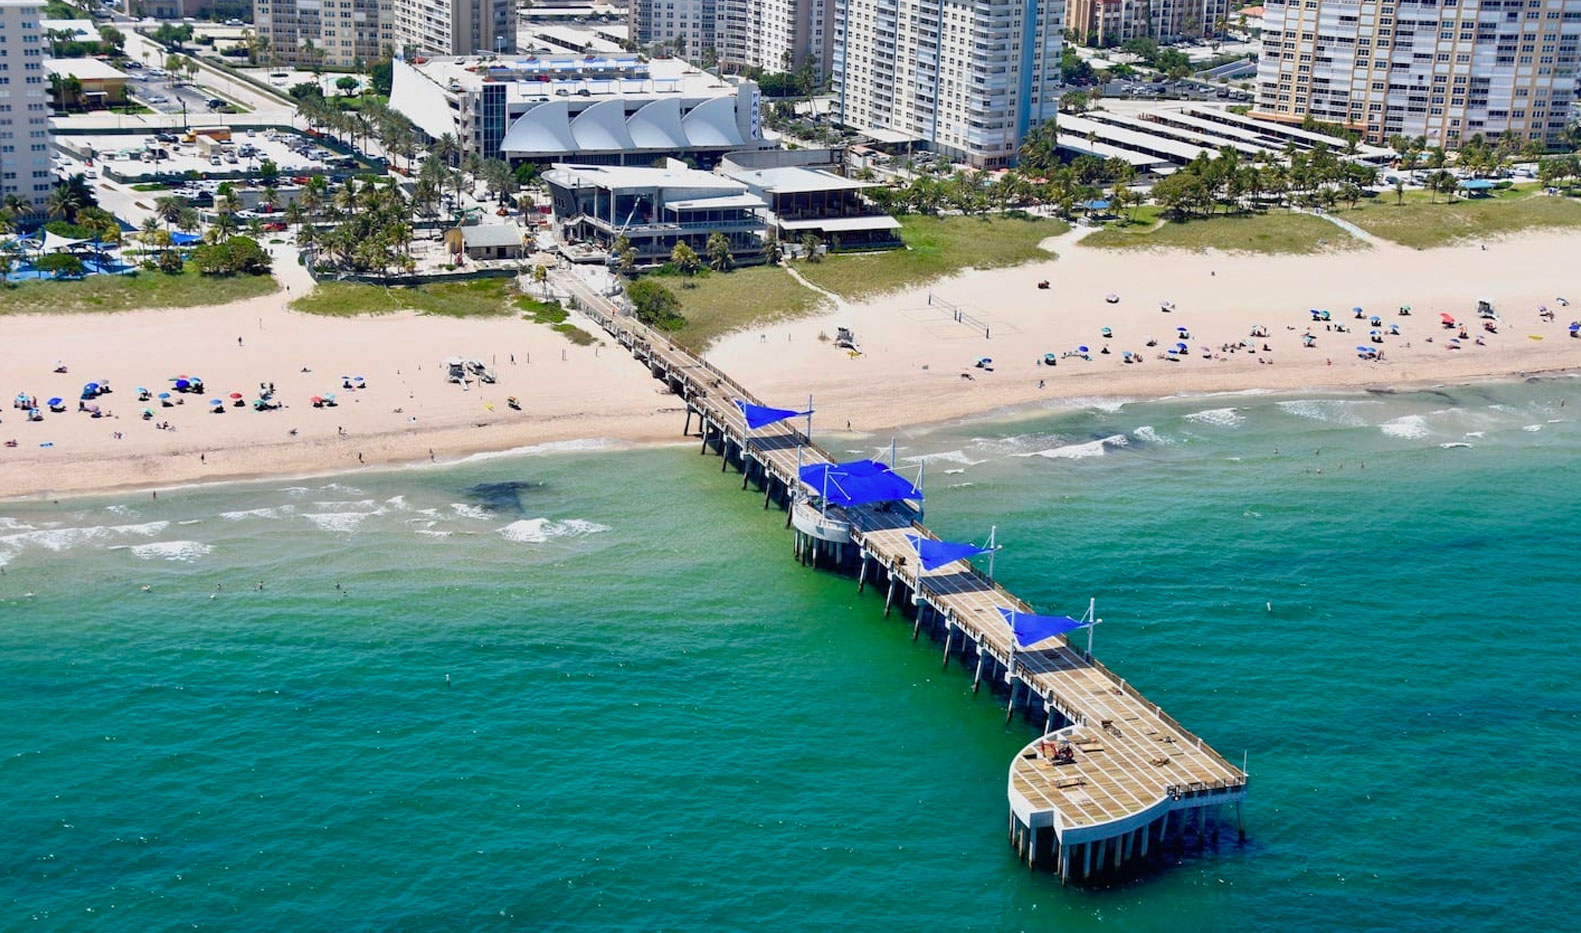 Oceanfront Restaurants and Recreation in Beautiful Pompano Beach